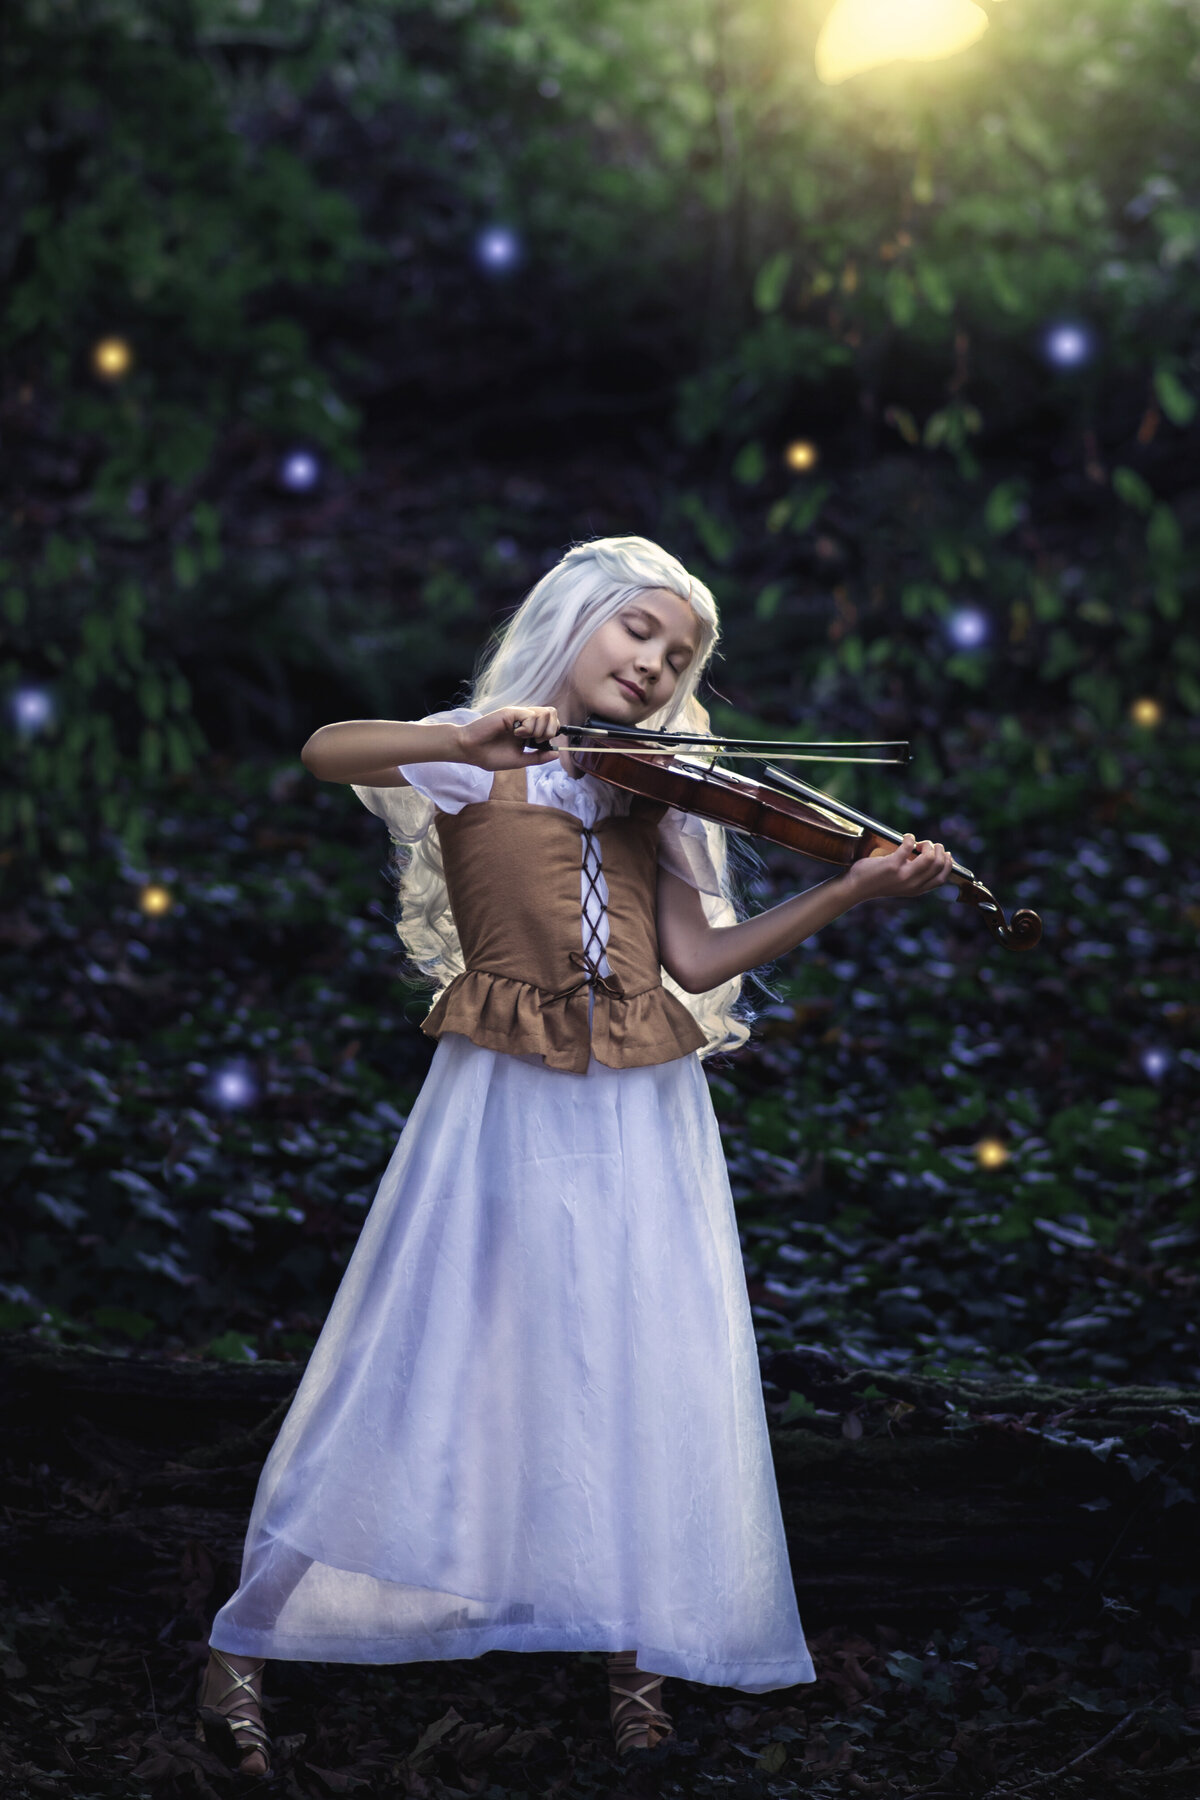 girl plays the violin and dances